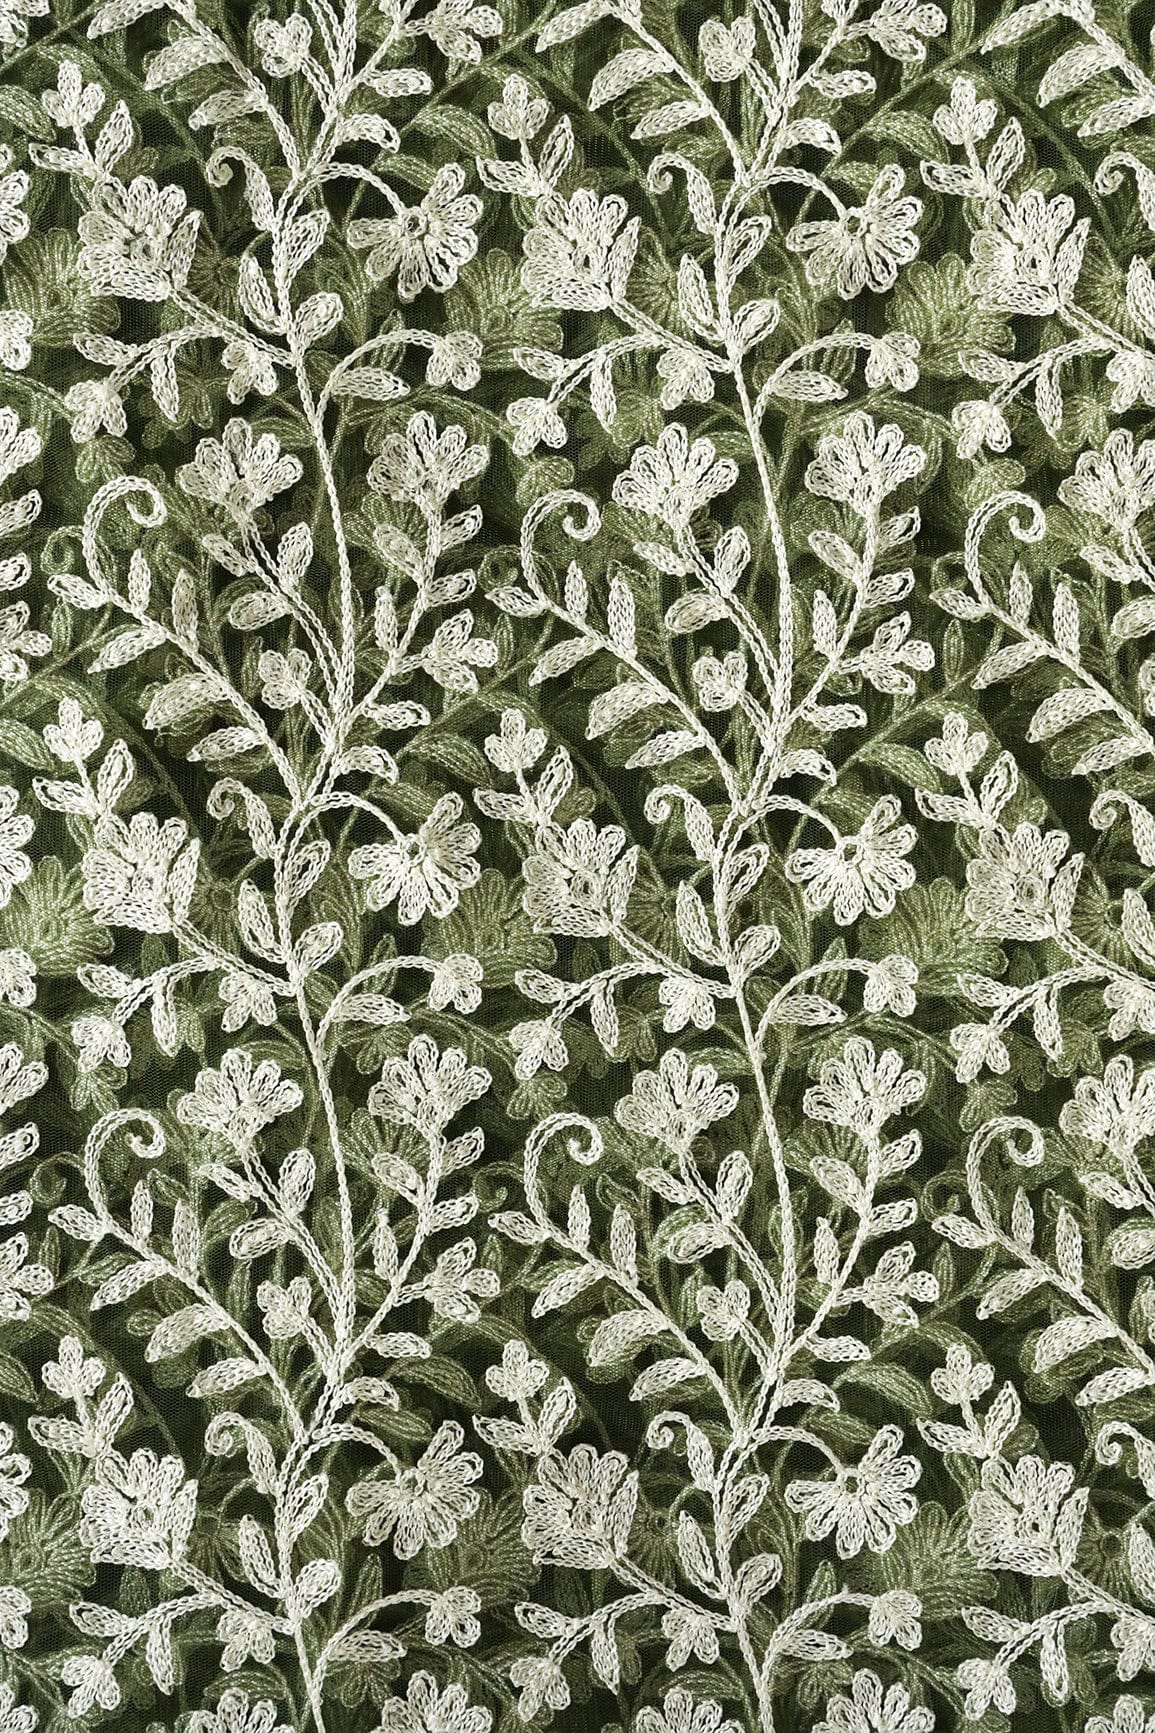 doeraa Embroidery Fabrics Beautiful White Thread Floral Embroidery On Dark Olive Soft Net Fabric